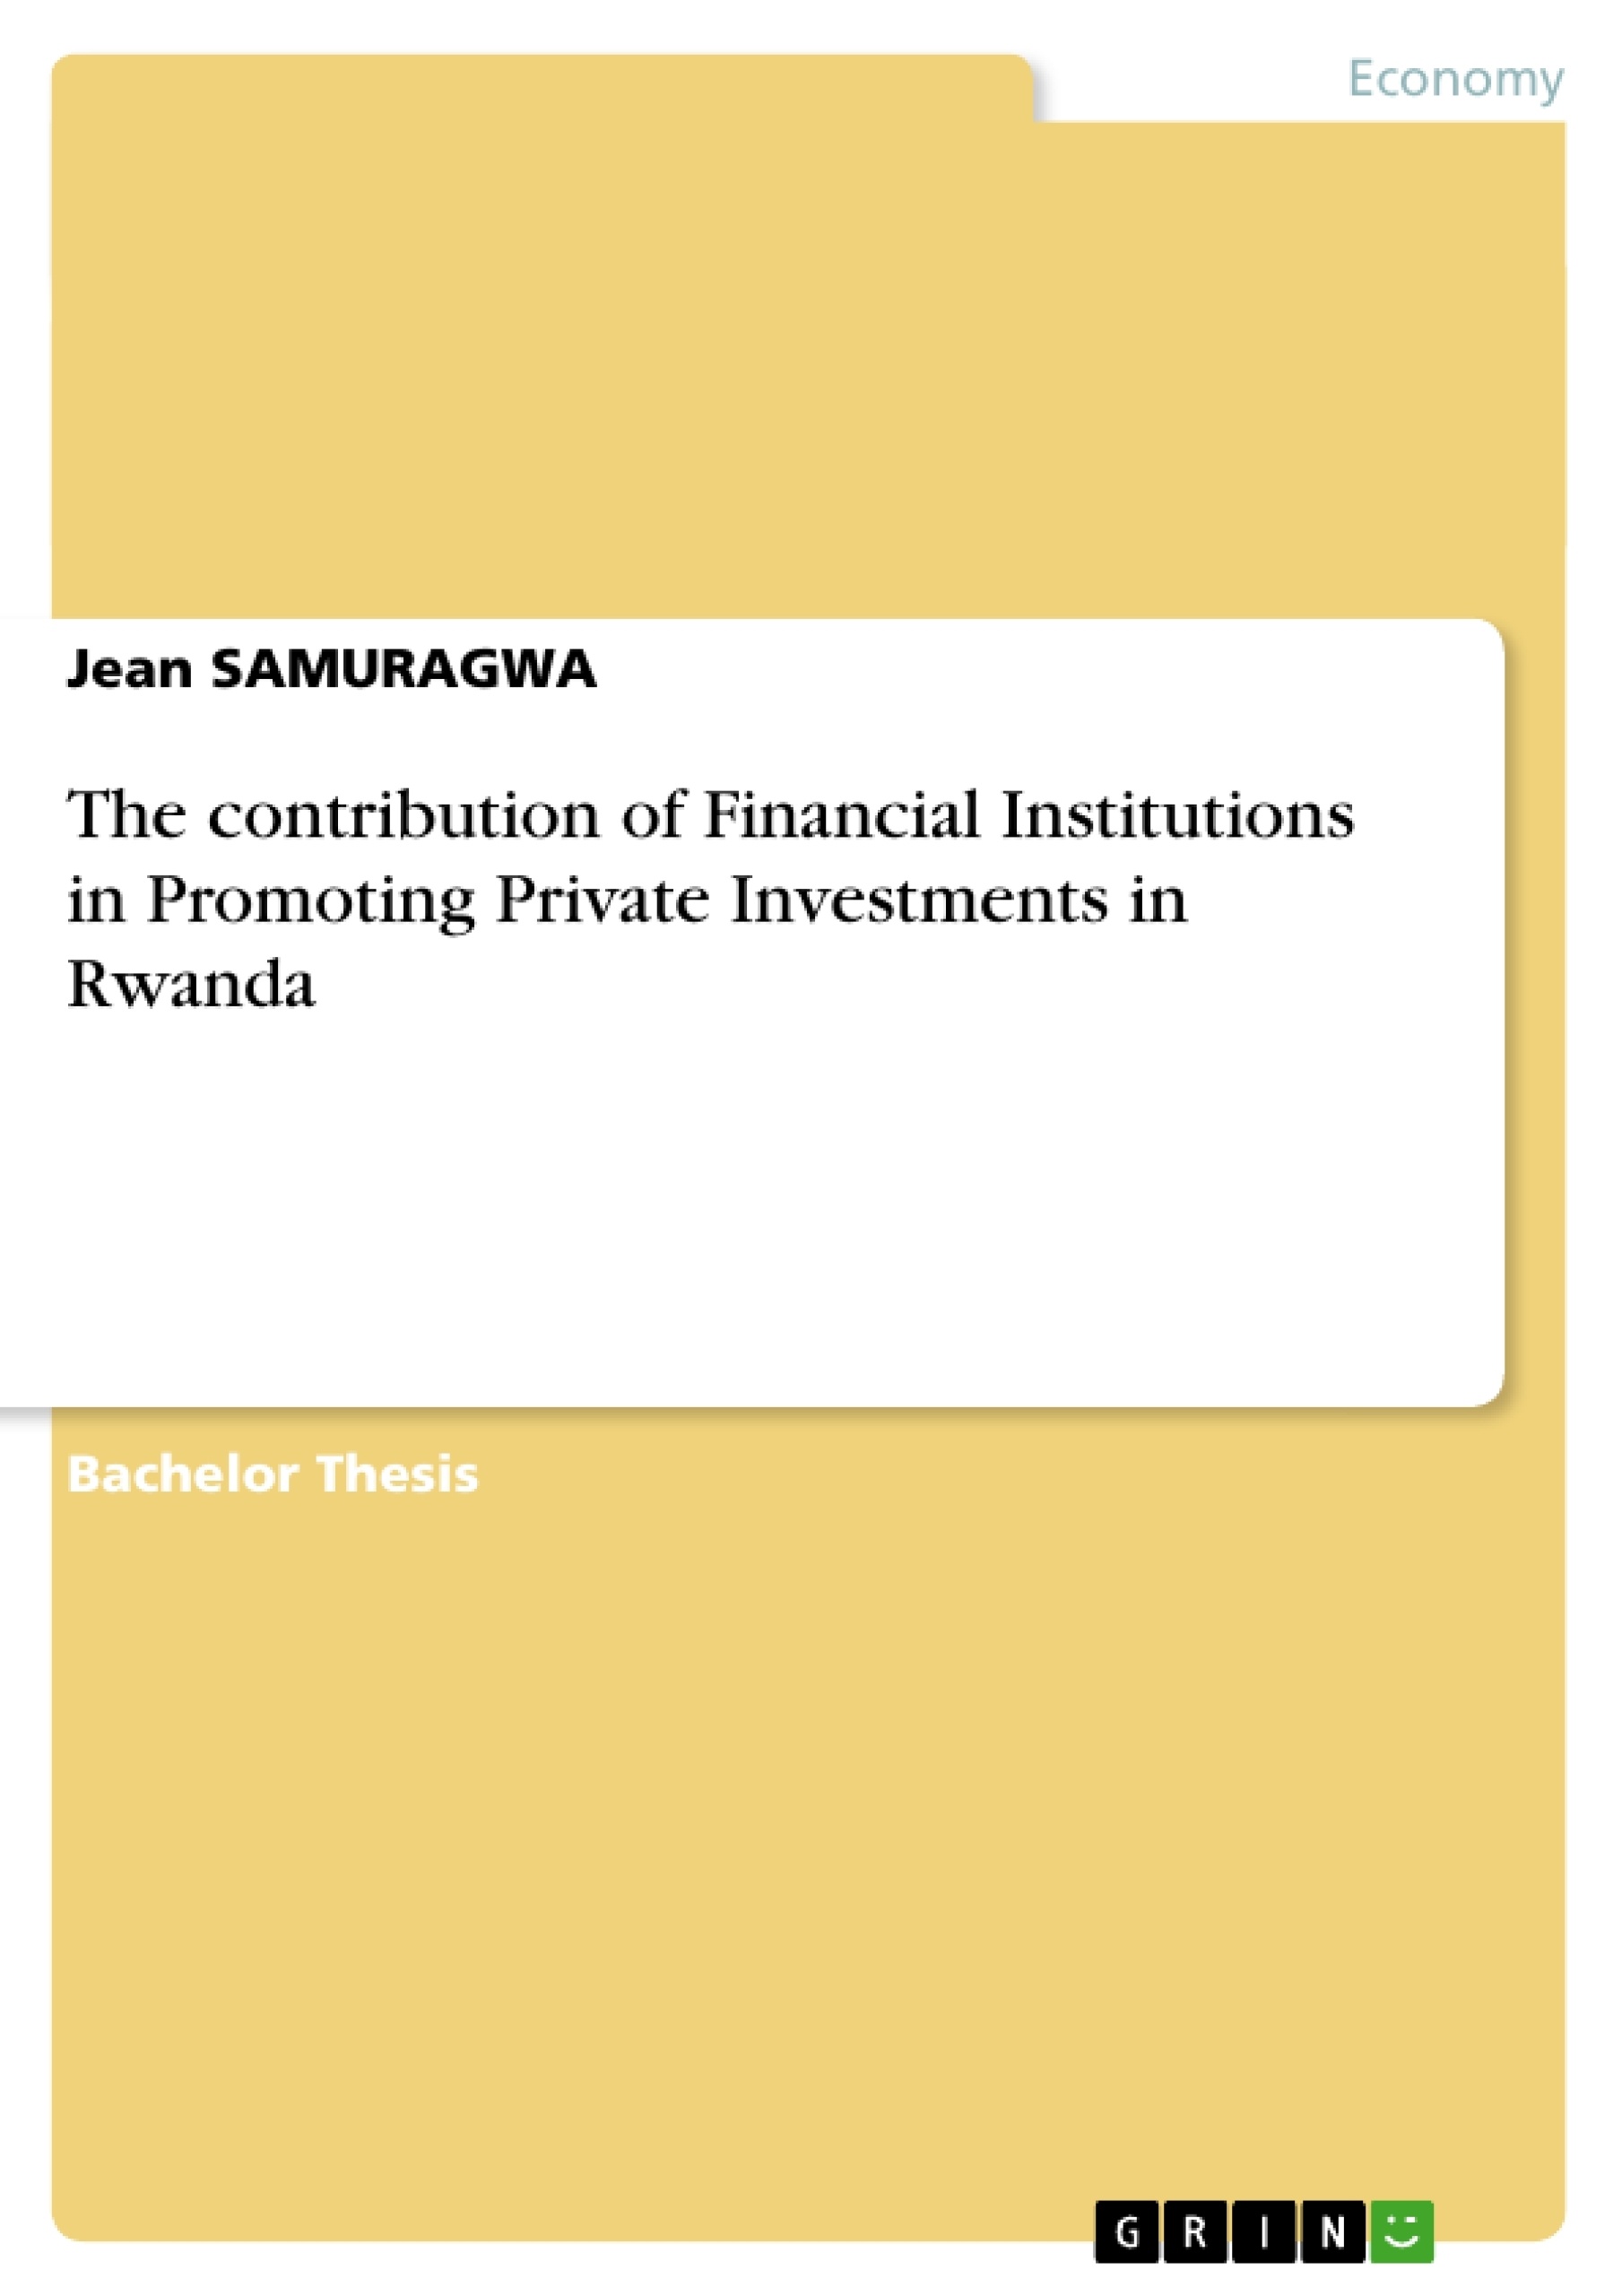 Titel: The contribution of Financial Institutions in Promoting Private Investments in Rwanda